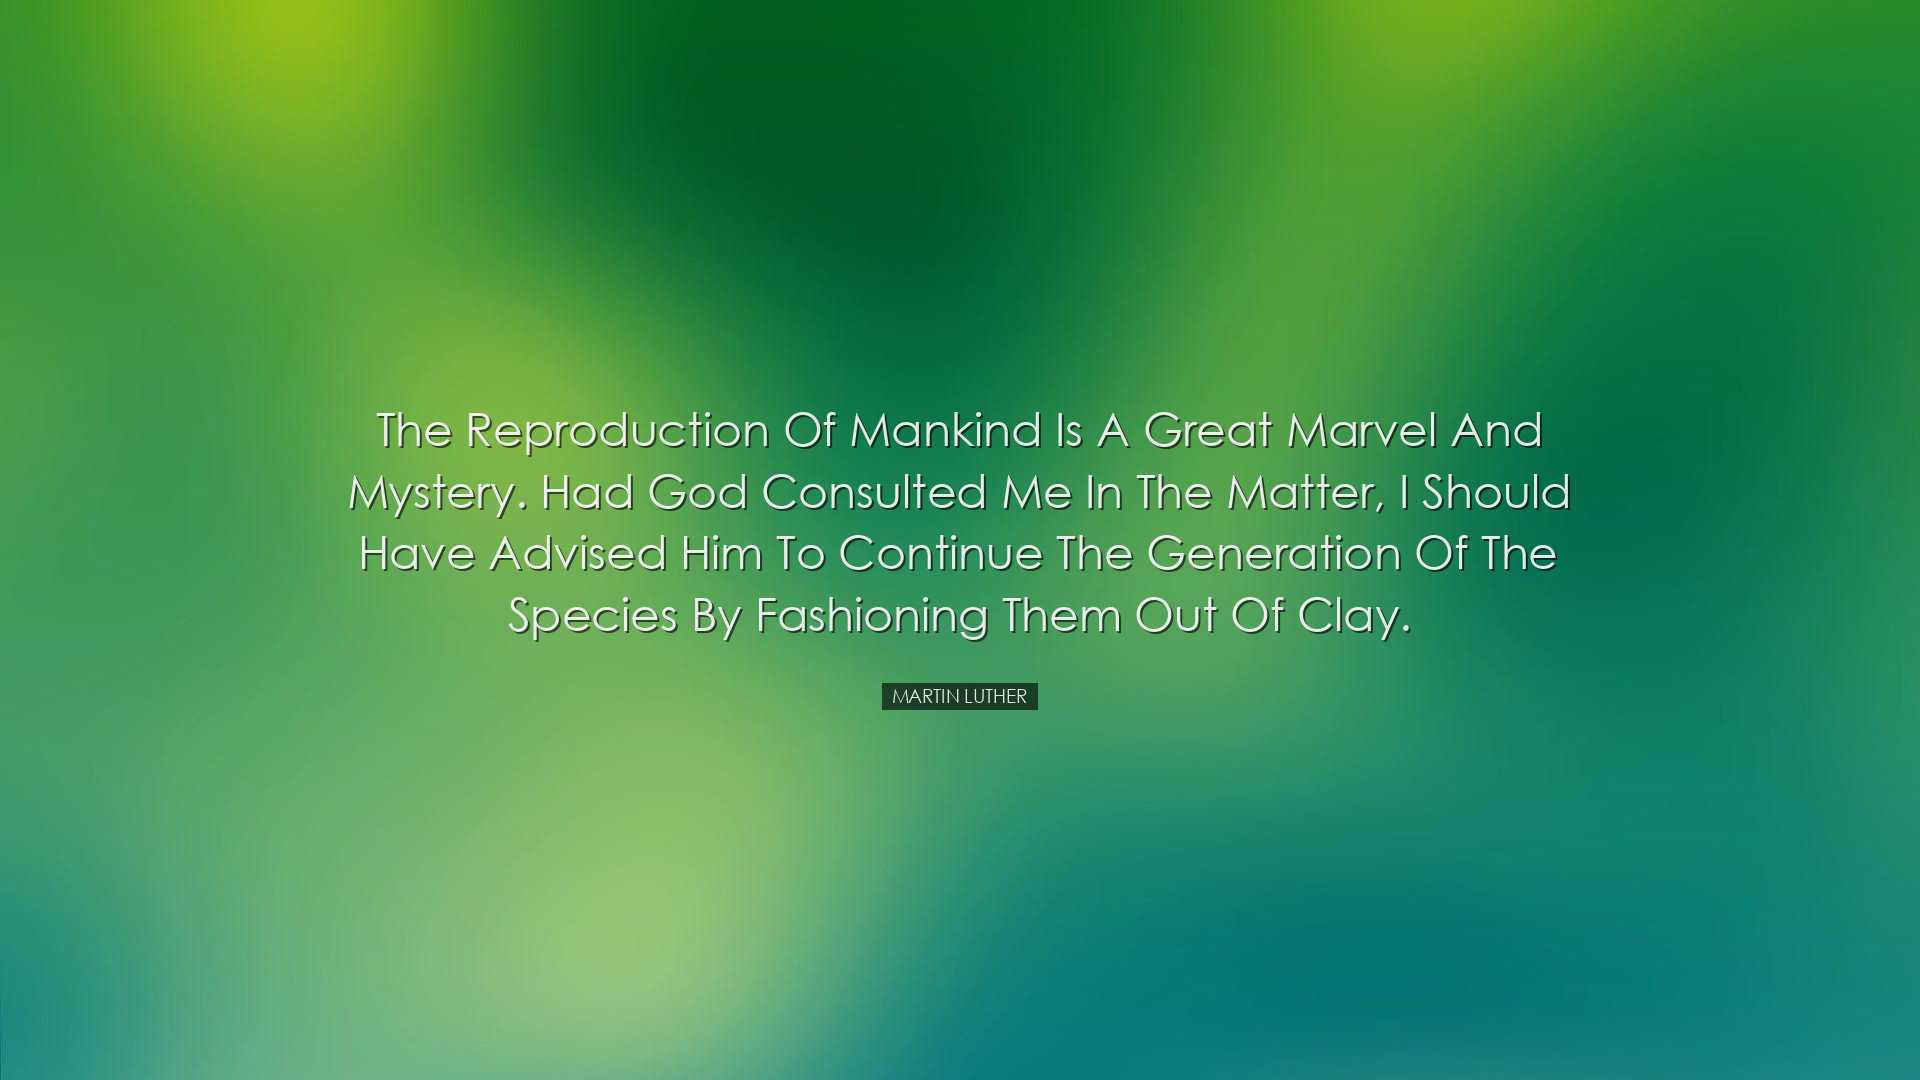 The reproduction of mankind is a great marvel and mystery. Had God